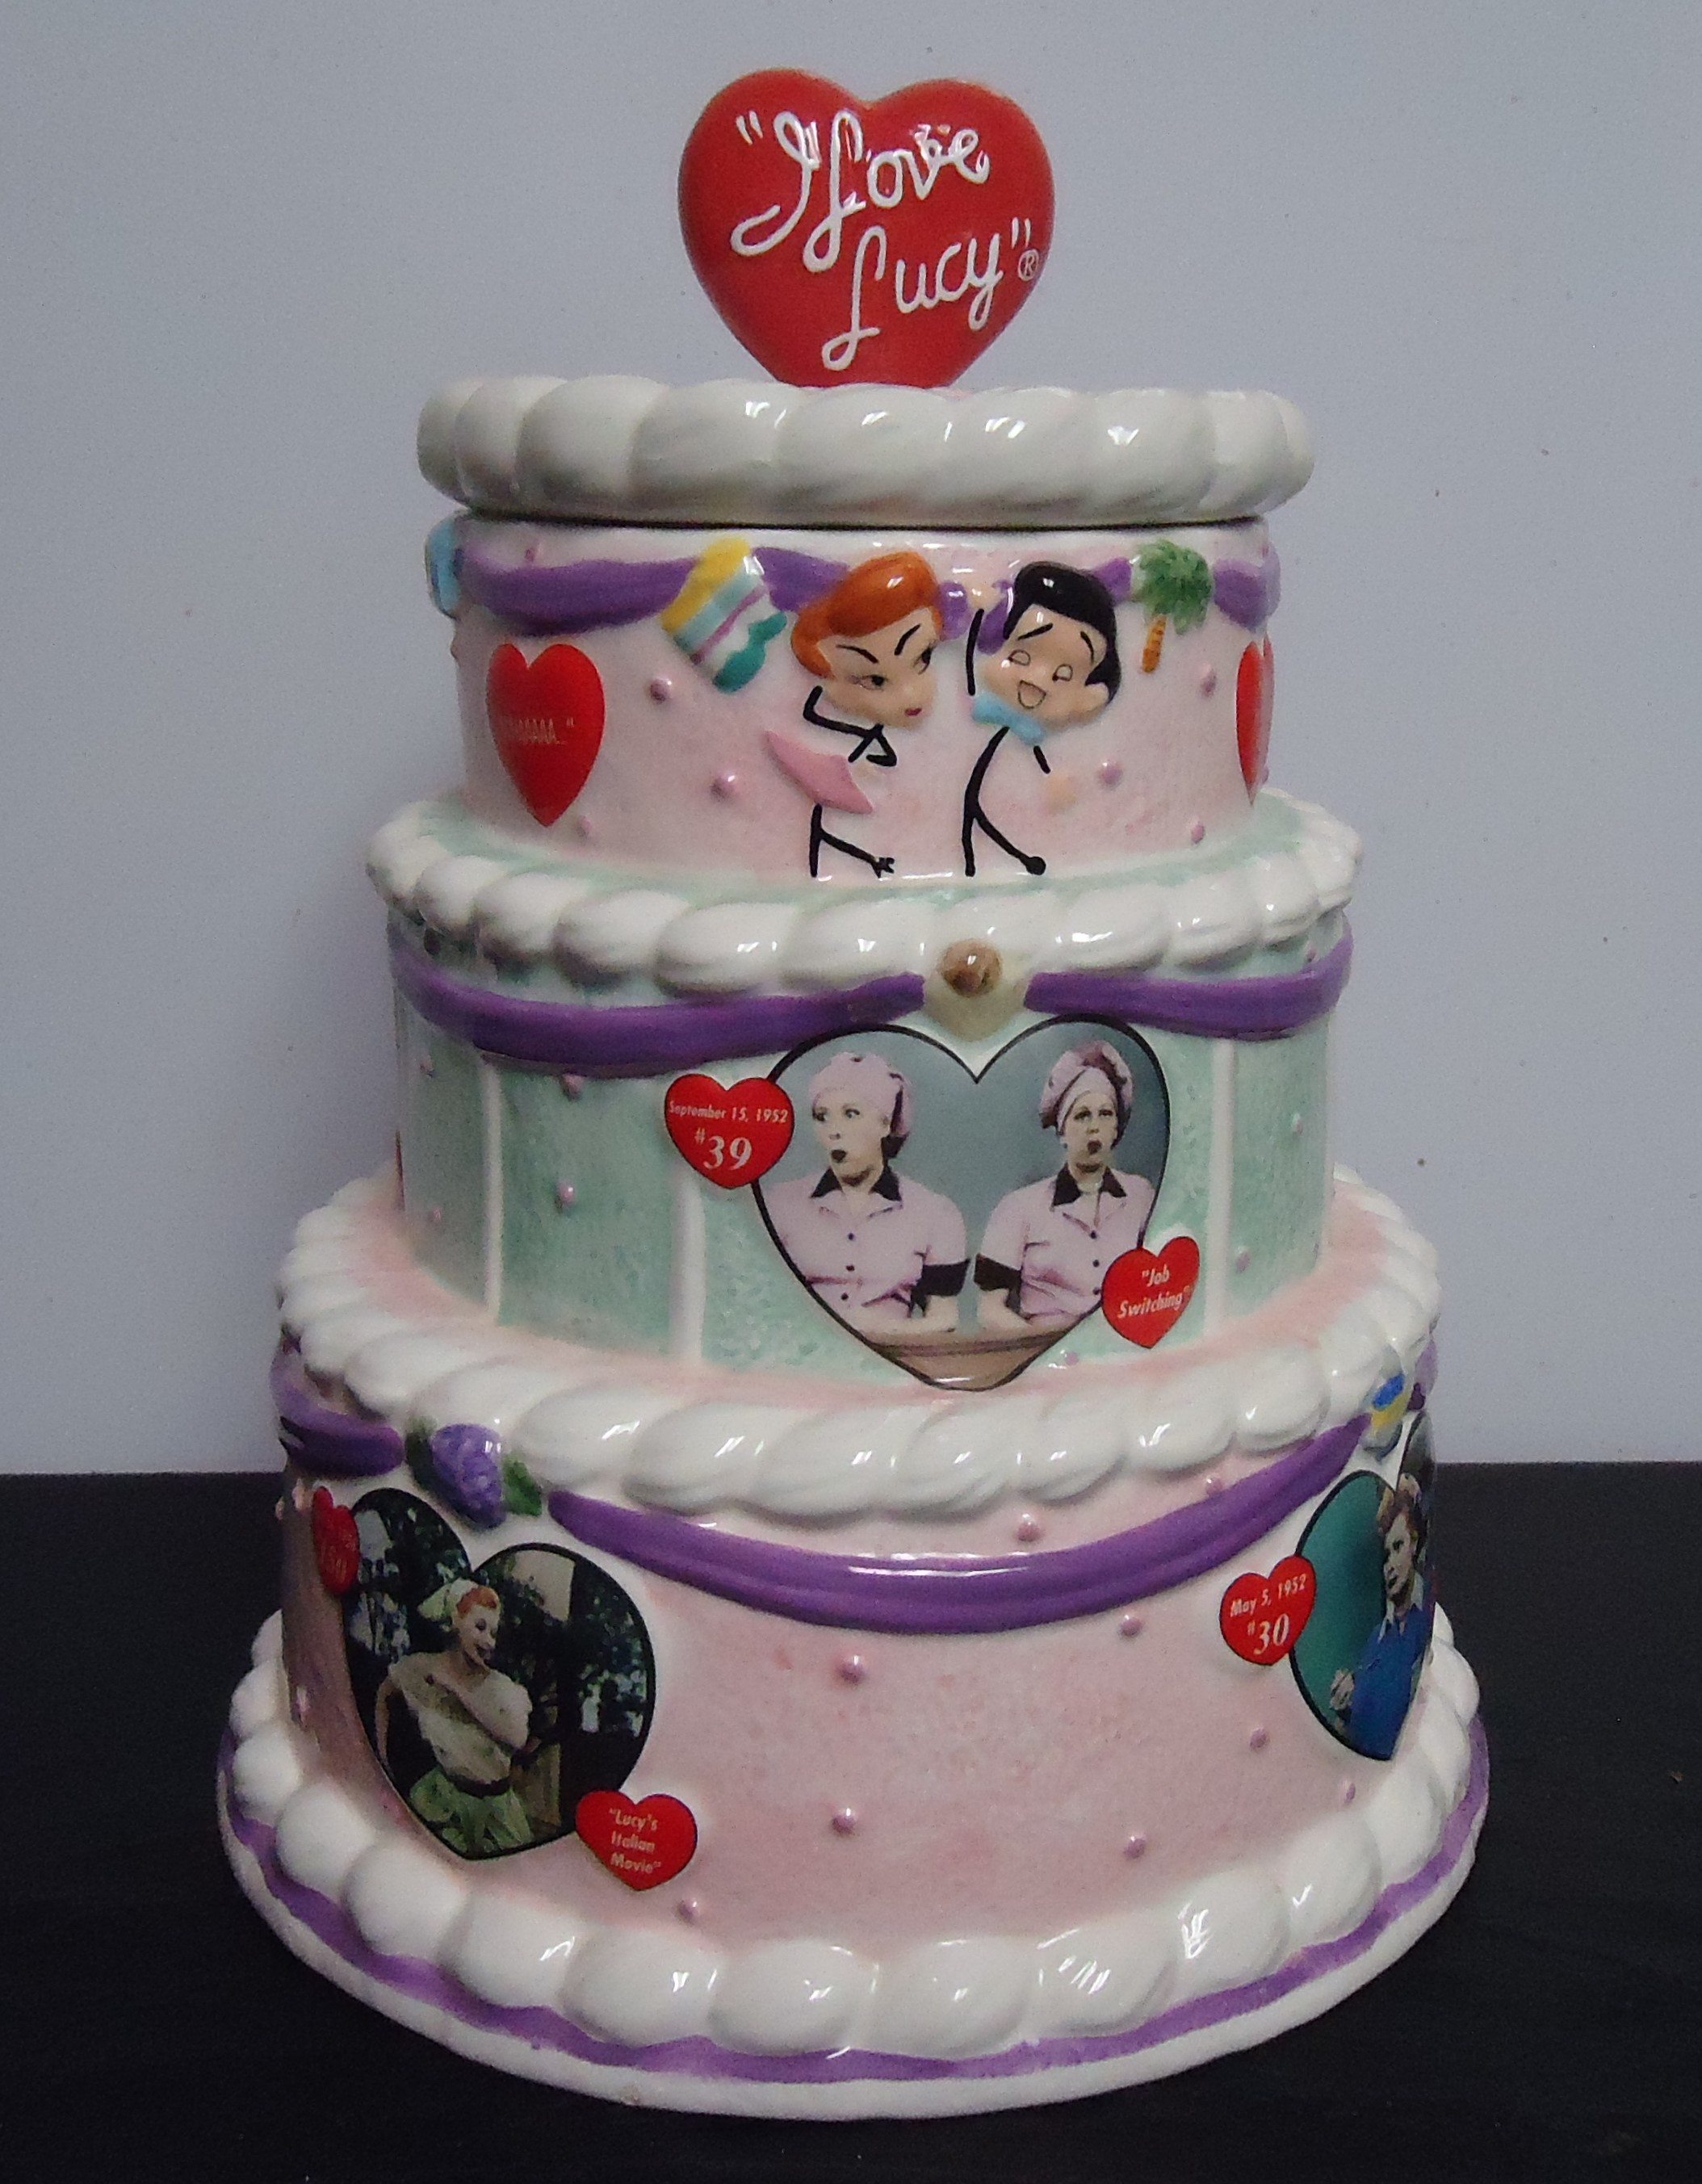 (2) "Limited Edition" I Love Lucy
Cookie Jar
$135.00